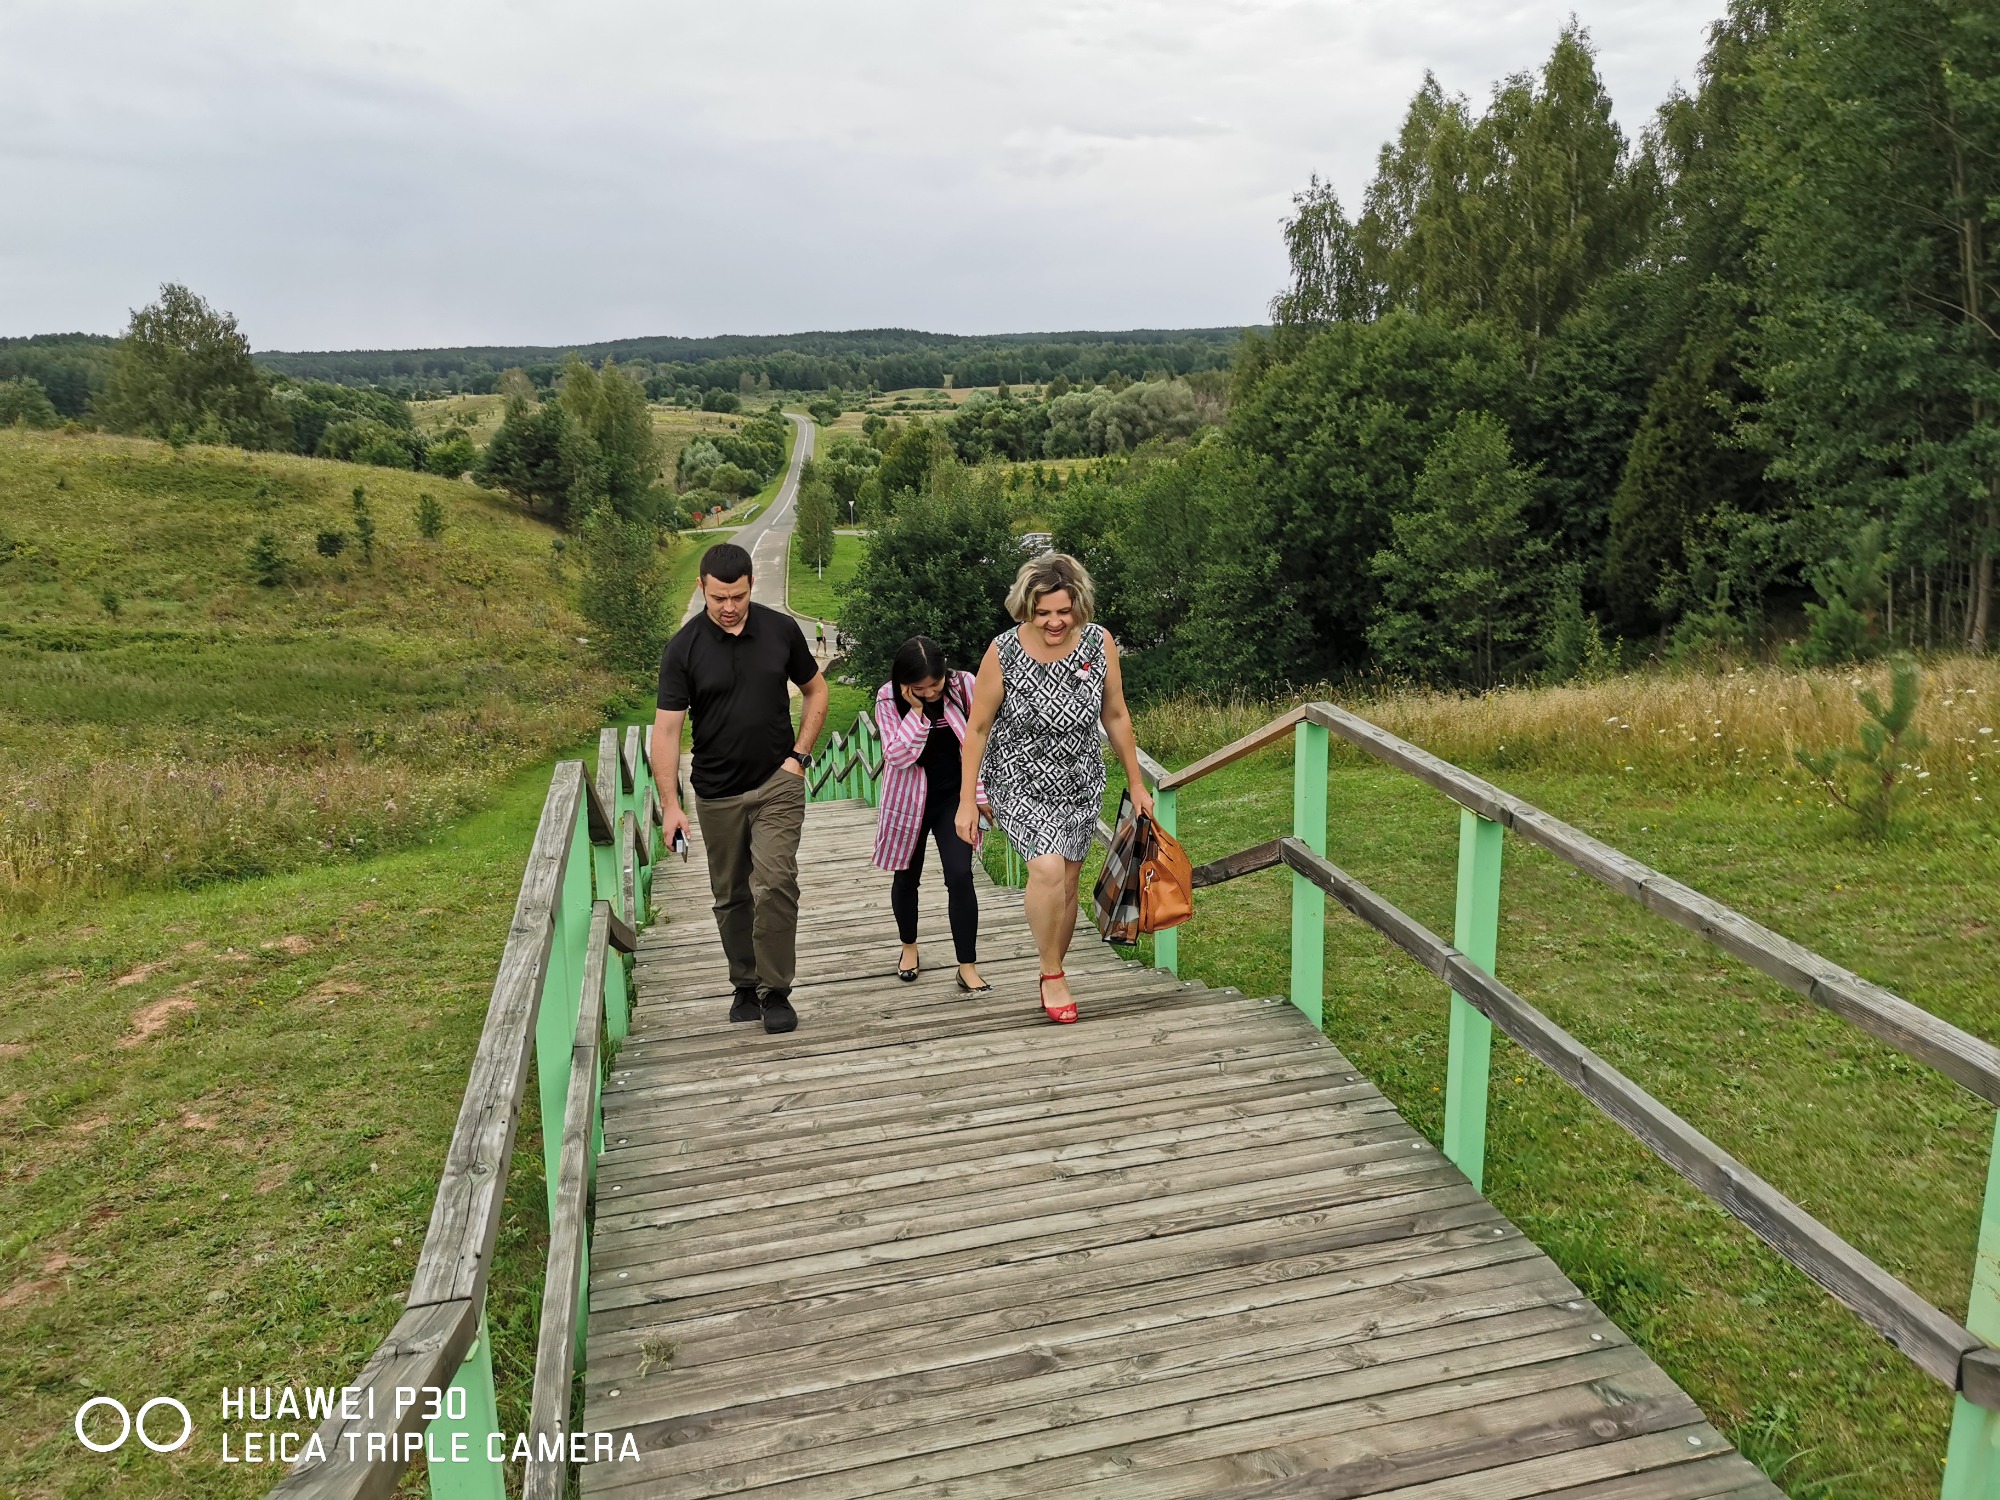 A business trip to the National Nature Reserve in Belarus to analyse the study tour routes